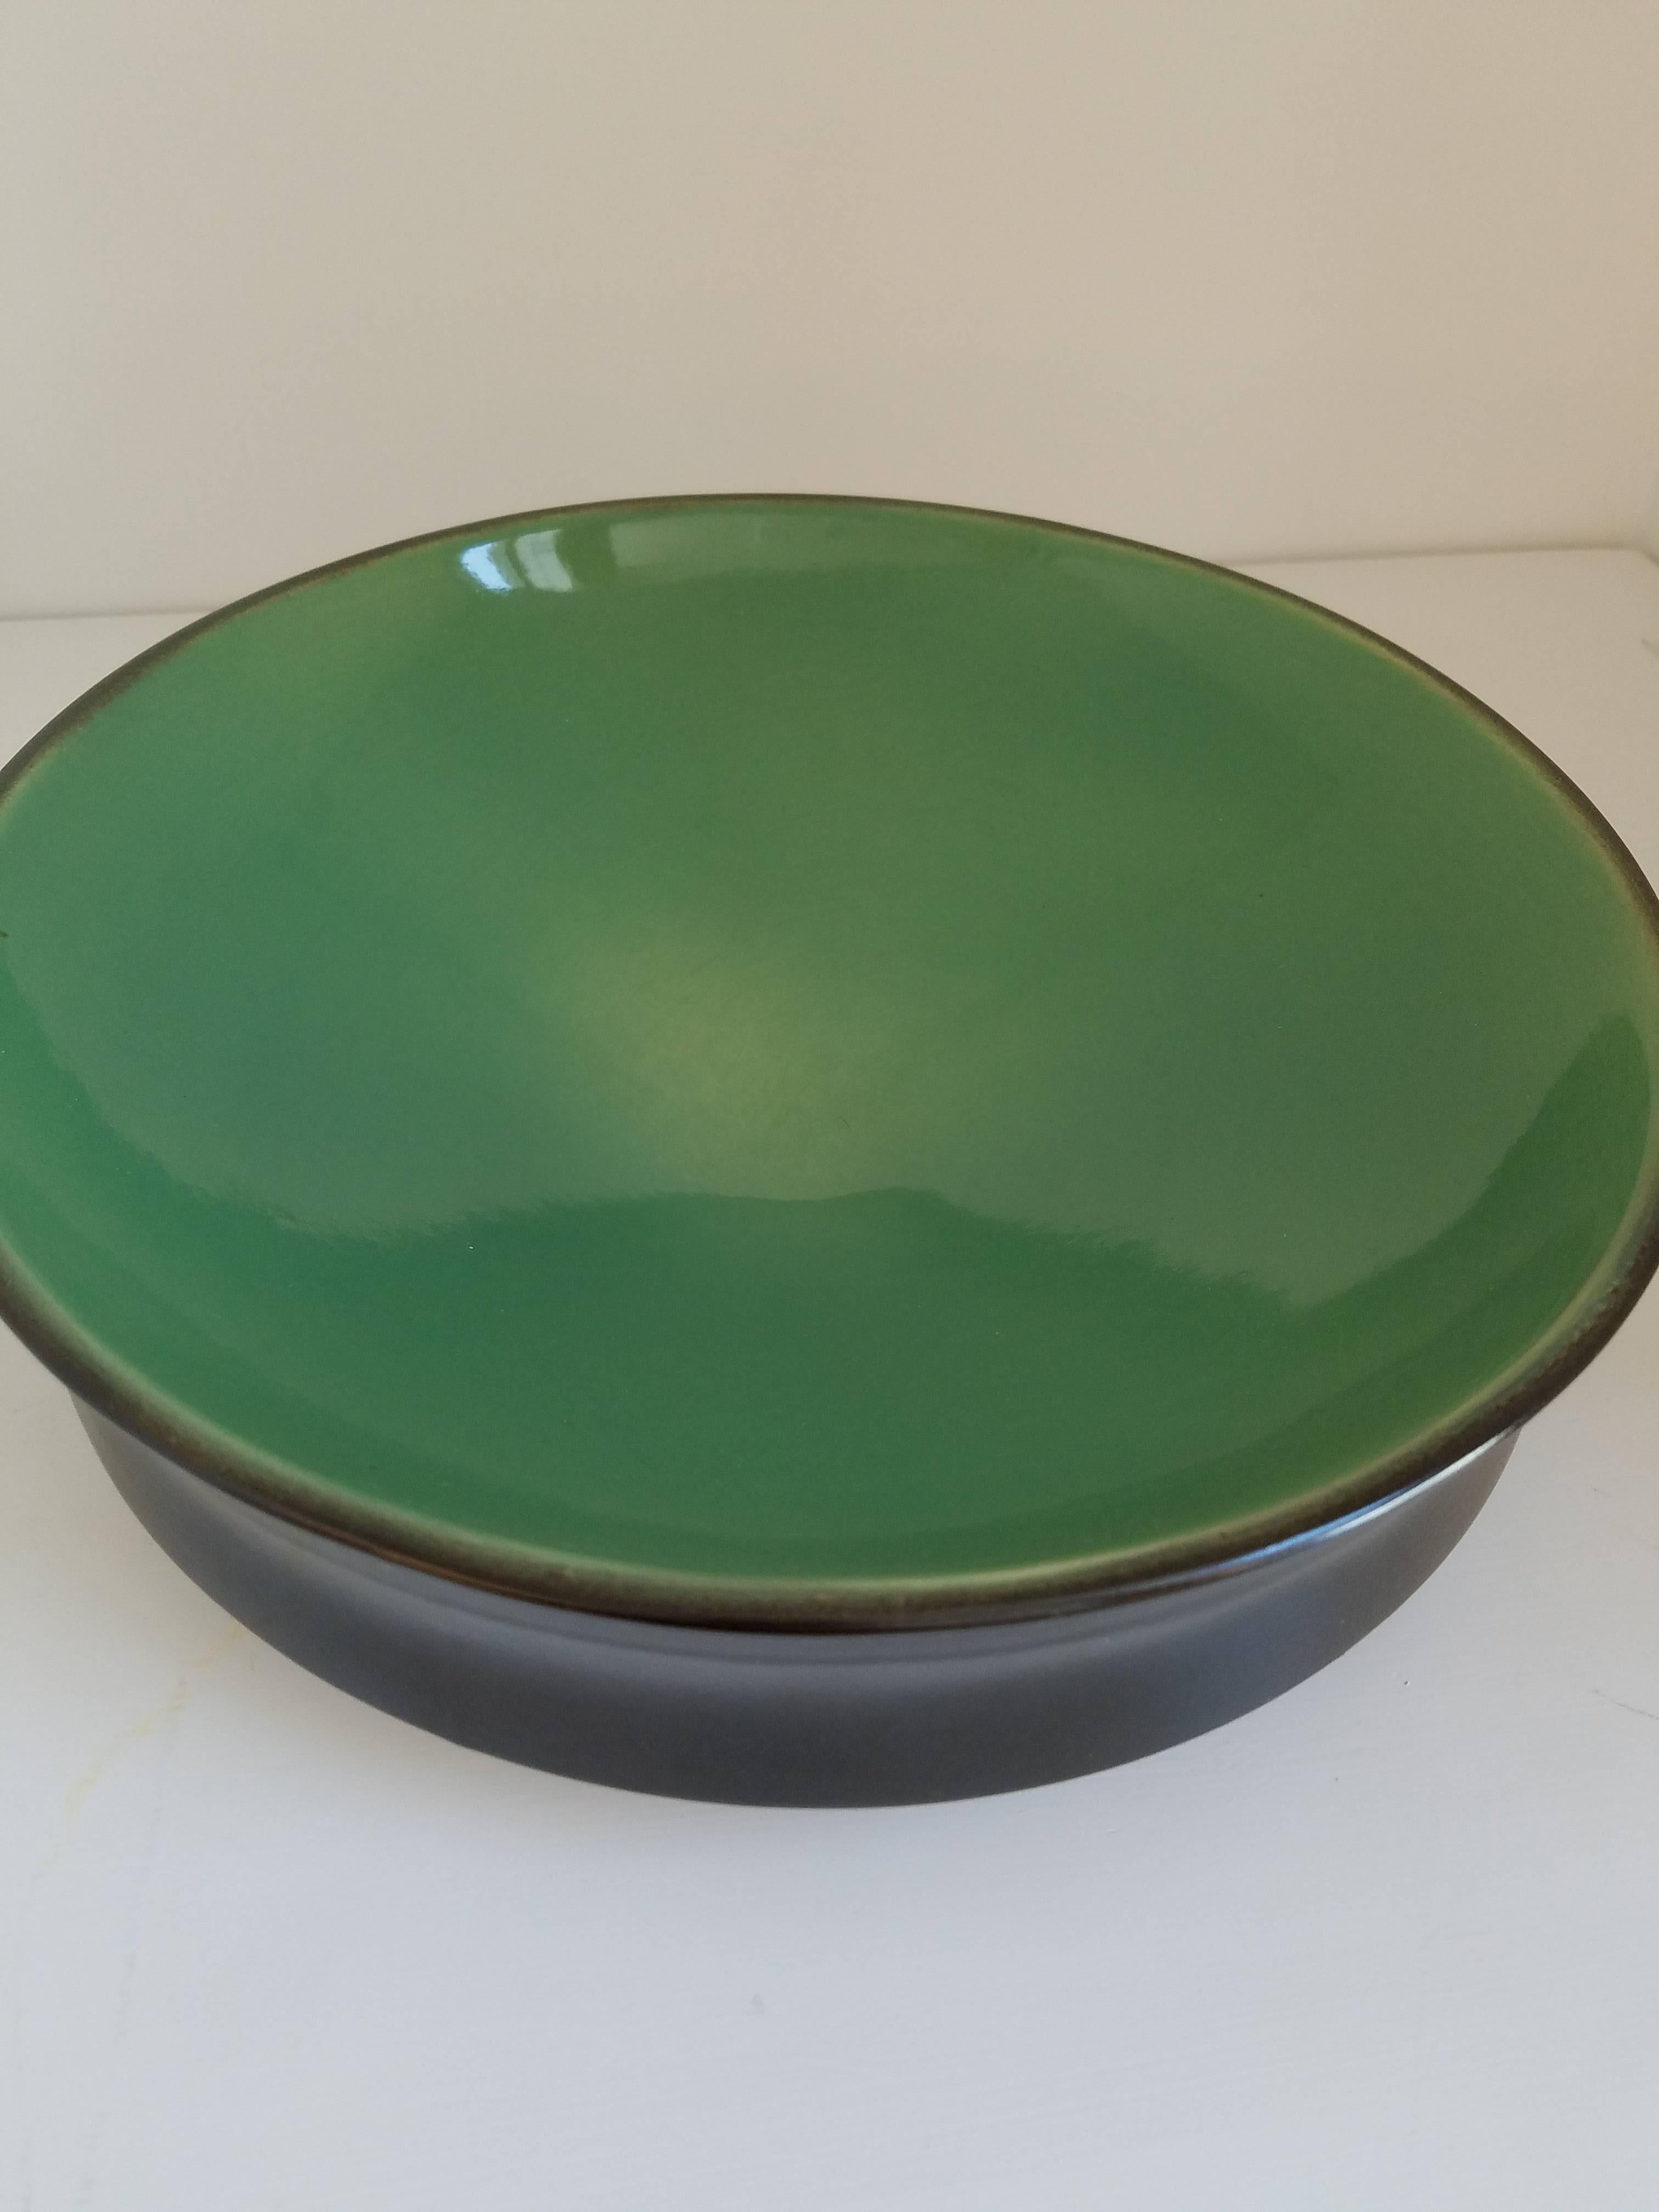 Hand thrown double glazed ceramic bowl with indented curved sides and contrast color glaze.
Details